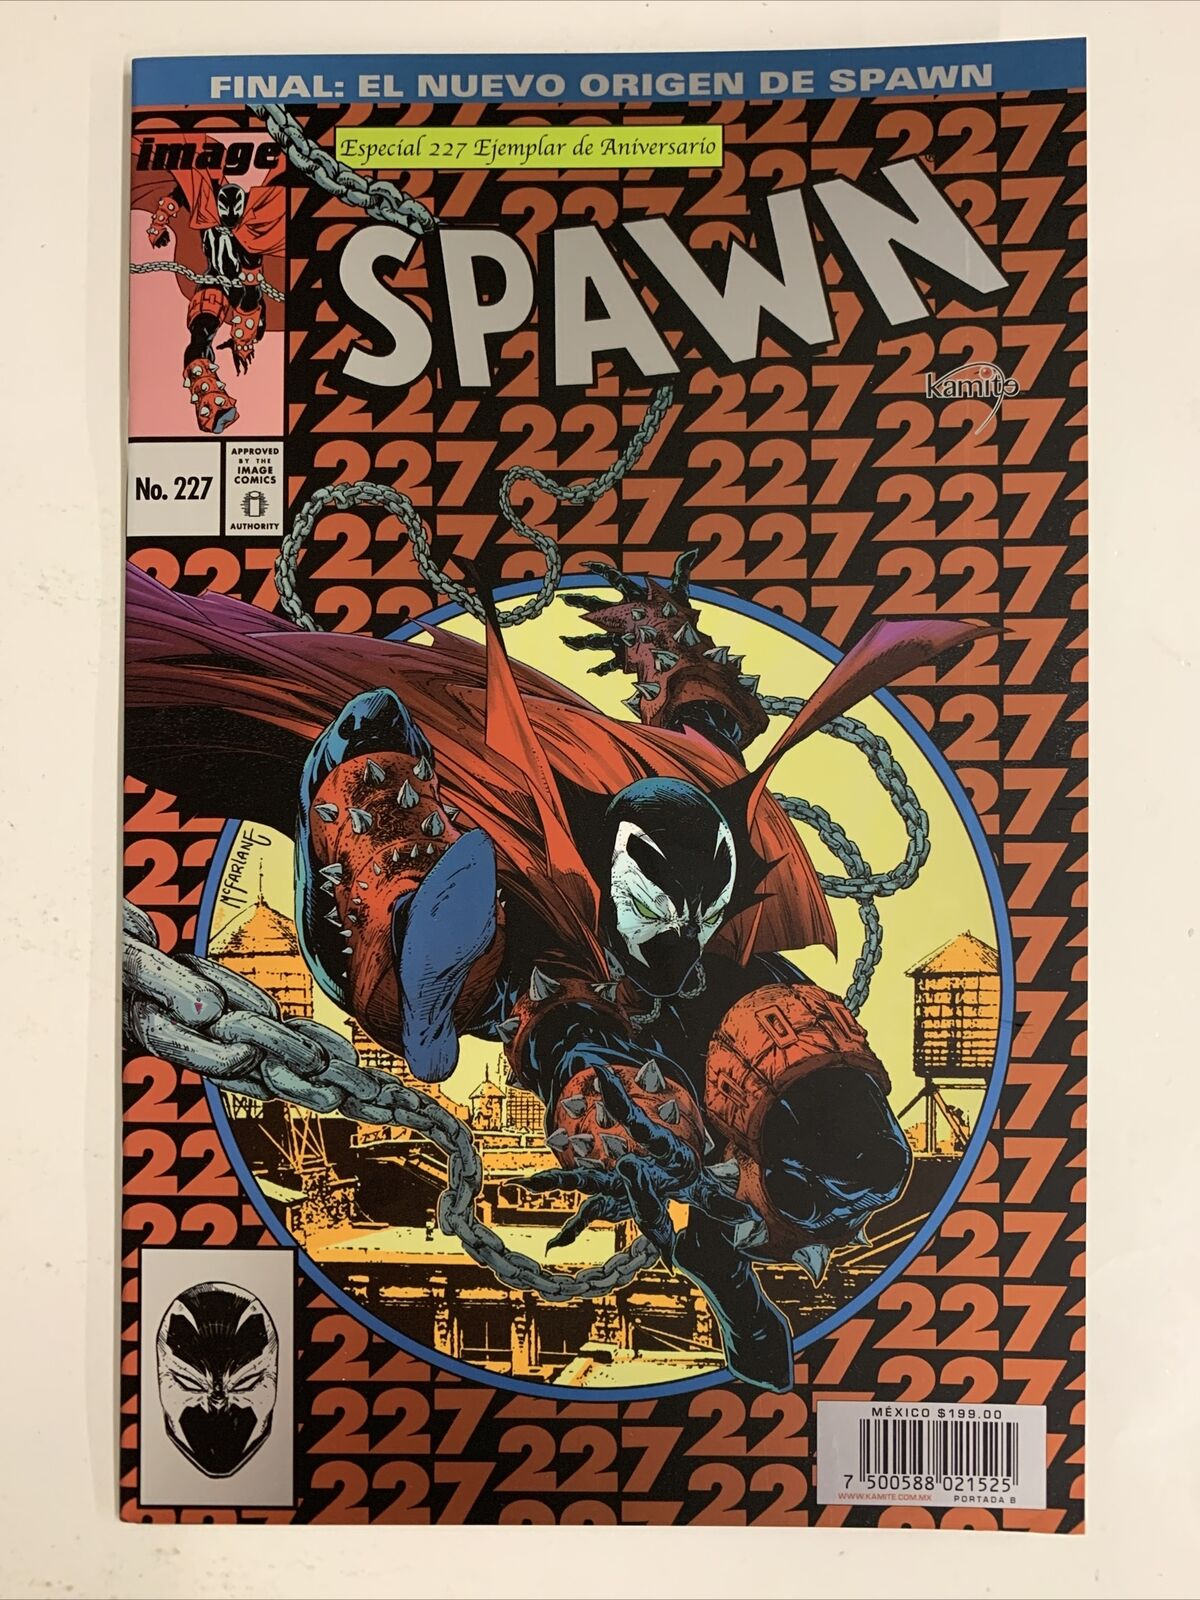 SPAWN #227 - Todd McFarlane - Amazing Spider-Man Homage Cover - NM Mexican Foil